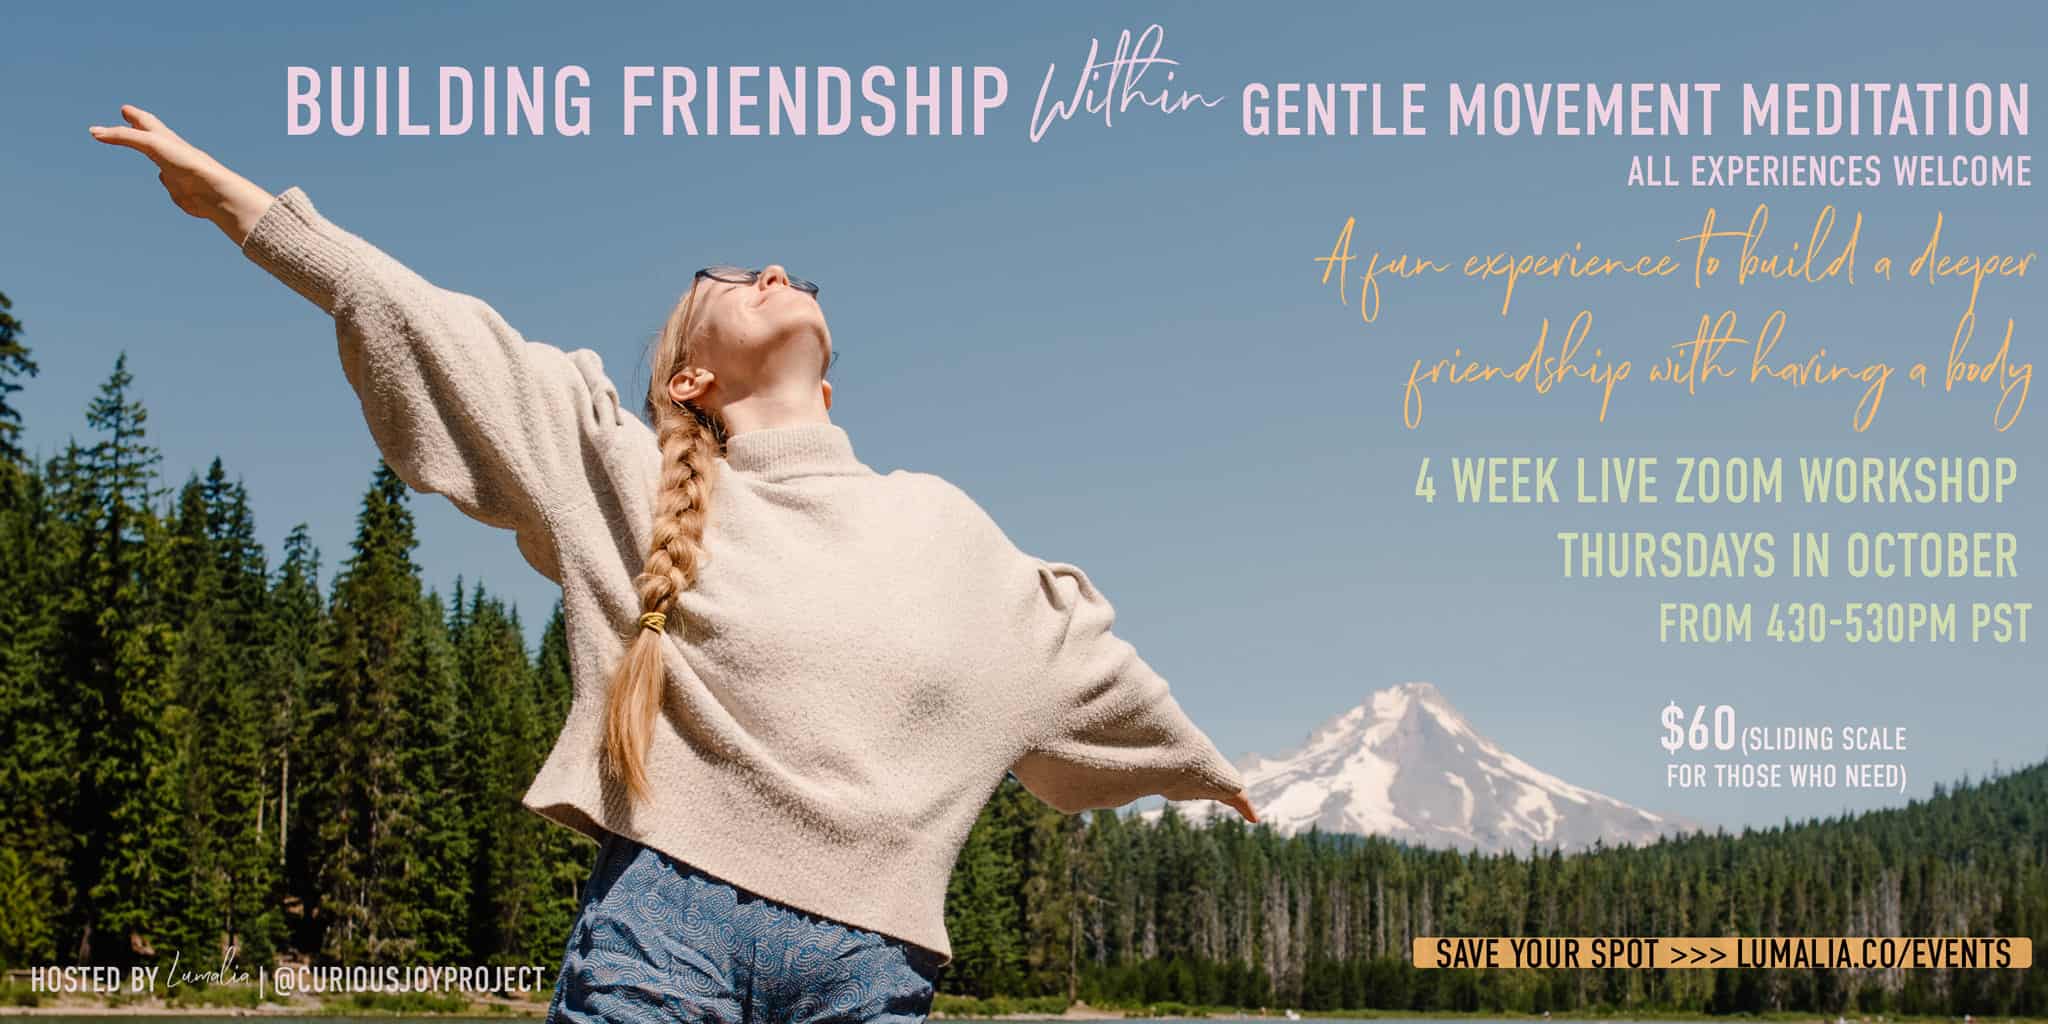 "Building Friendship Within Gentle Movement Meditation All Experiences Welcome. A fun experience to build a deeper friendship with having a body. 4 Week Live Zoom Workshop Thursdays in October from 430-530pm PST. $60 (Sliding scale for those who need)" Lumalia with her arms outstretched wide with a mountain the background